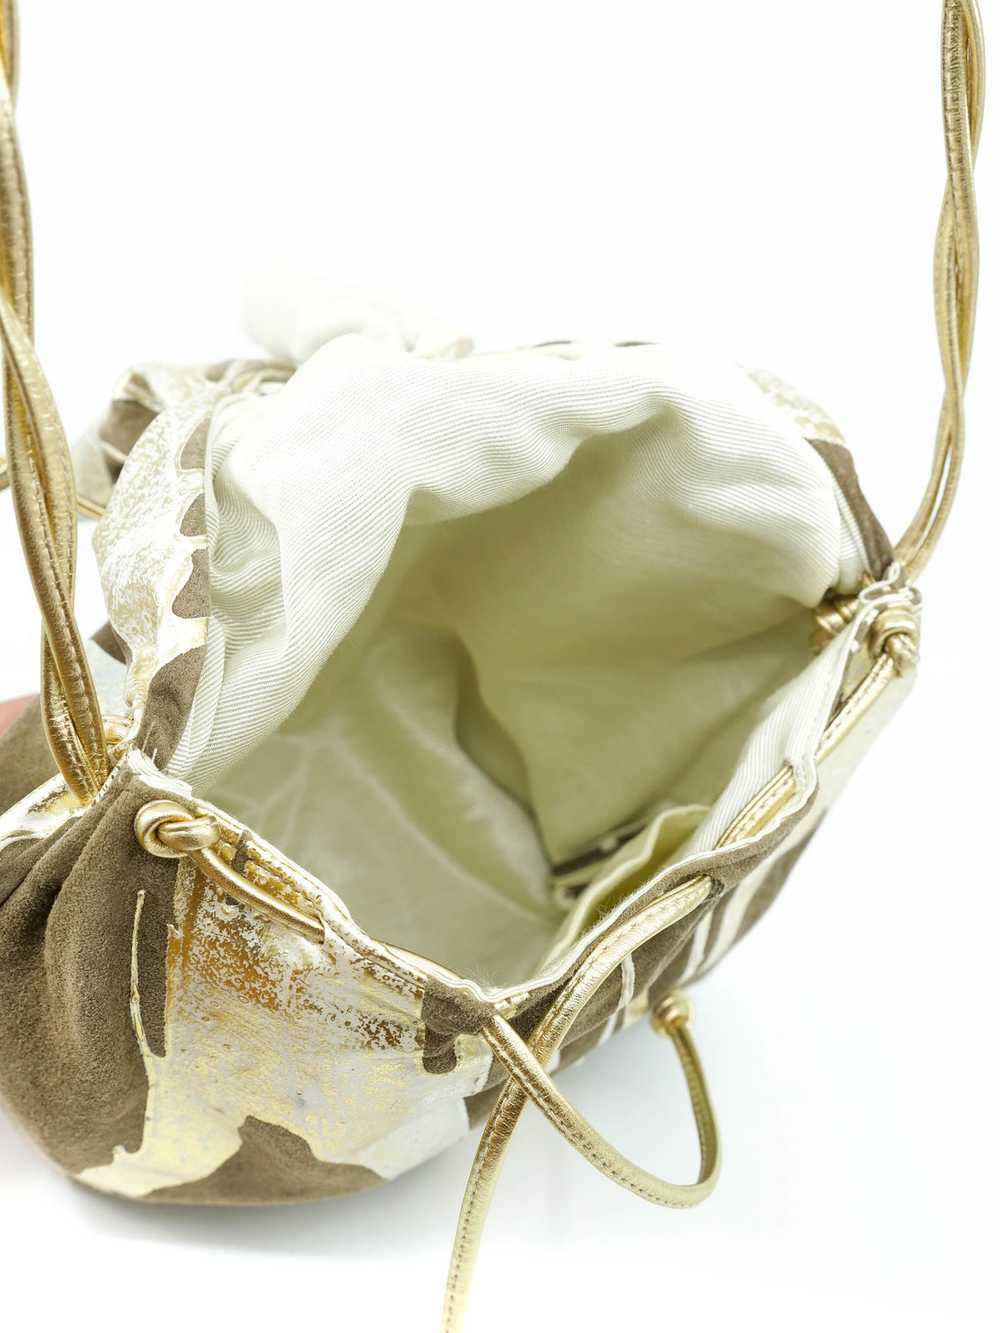 Terry and Toni Painted Suede Bucket Bag - image 4